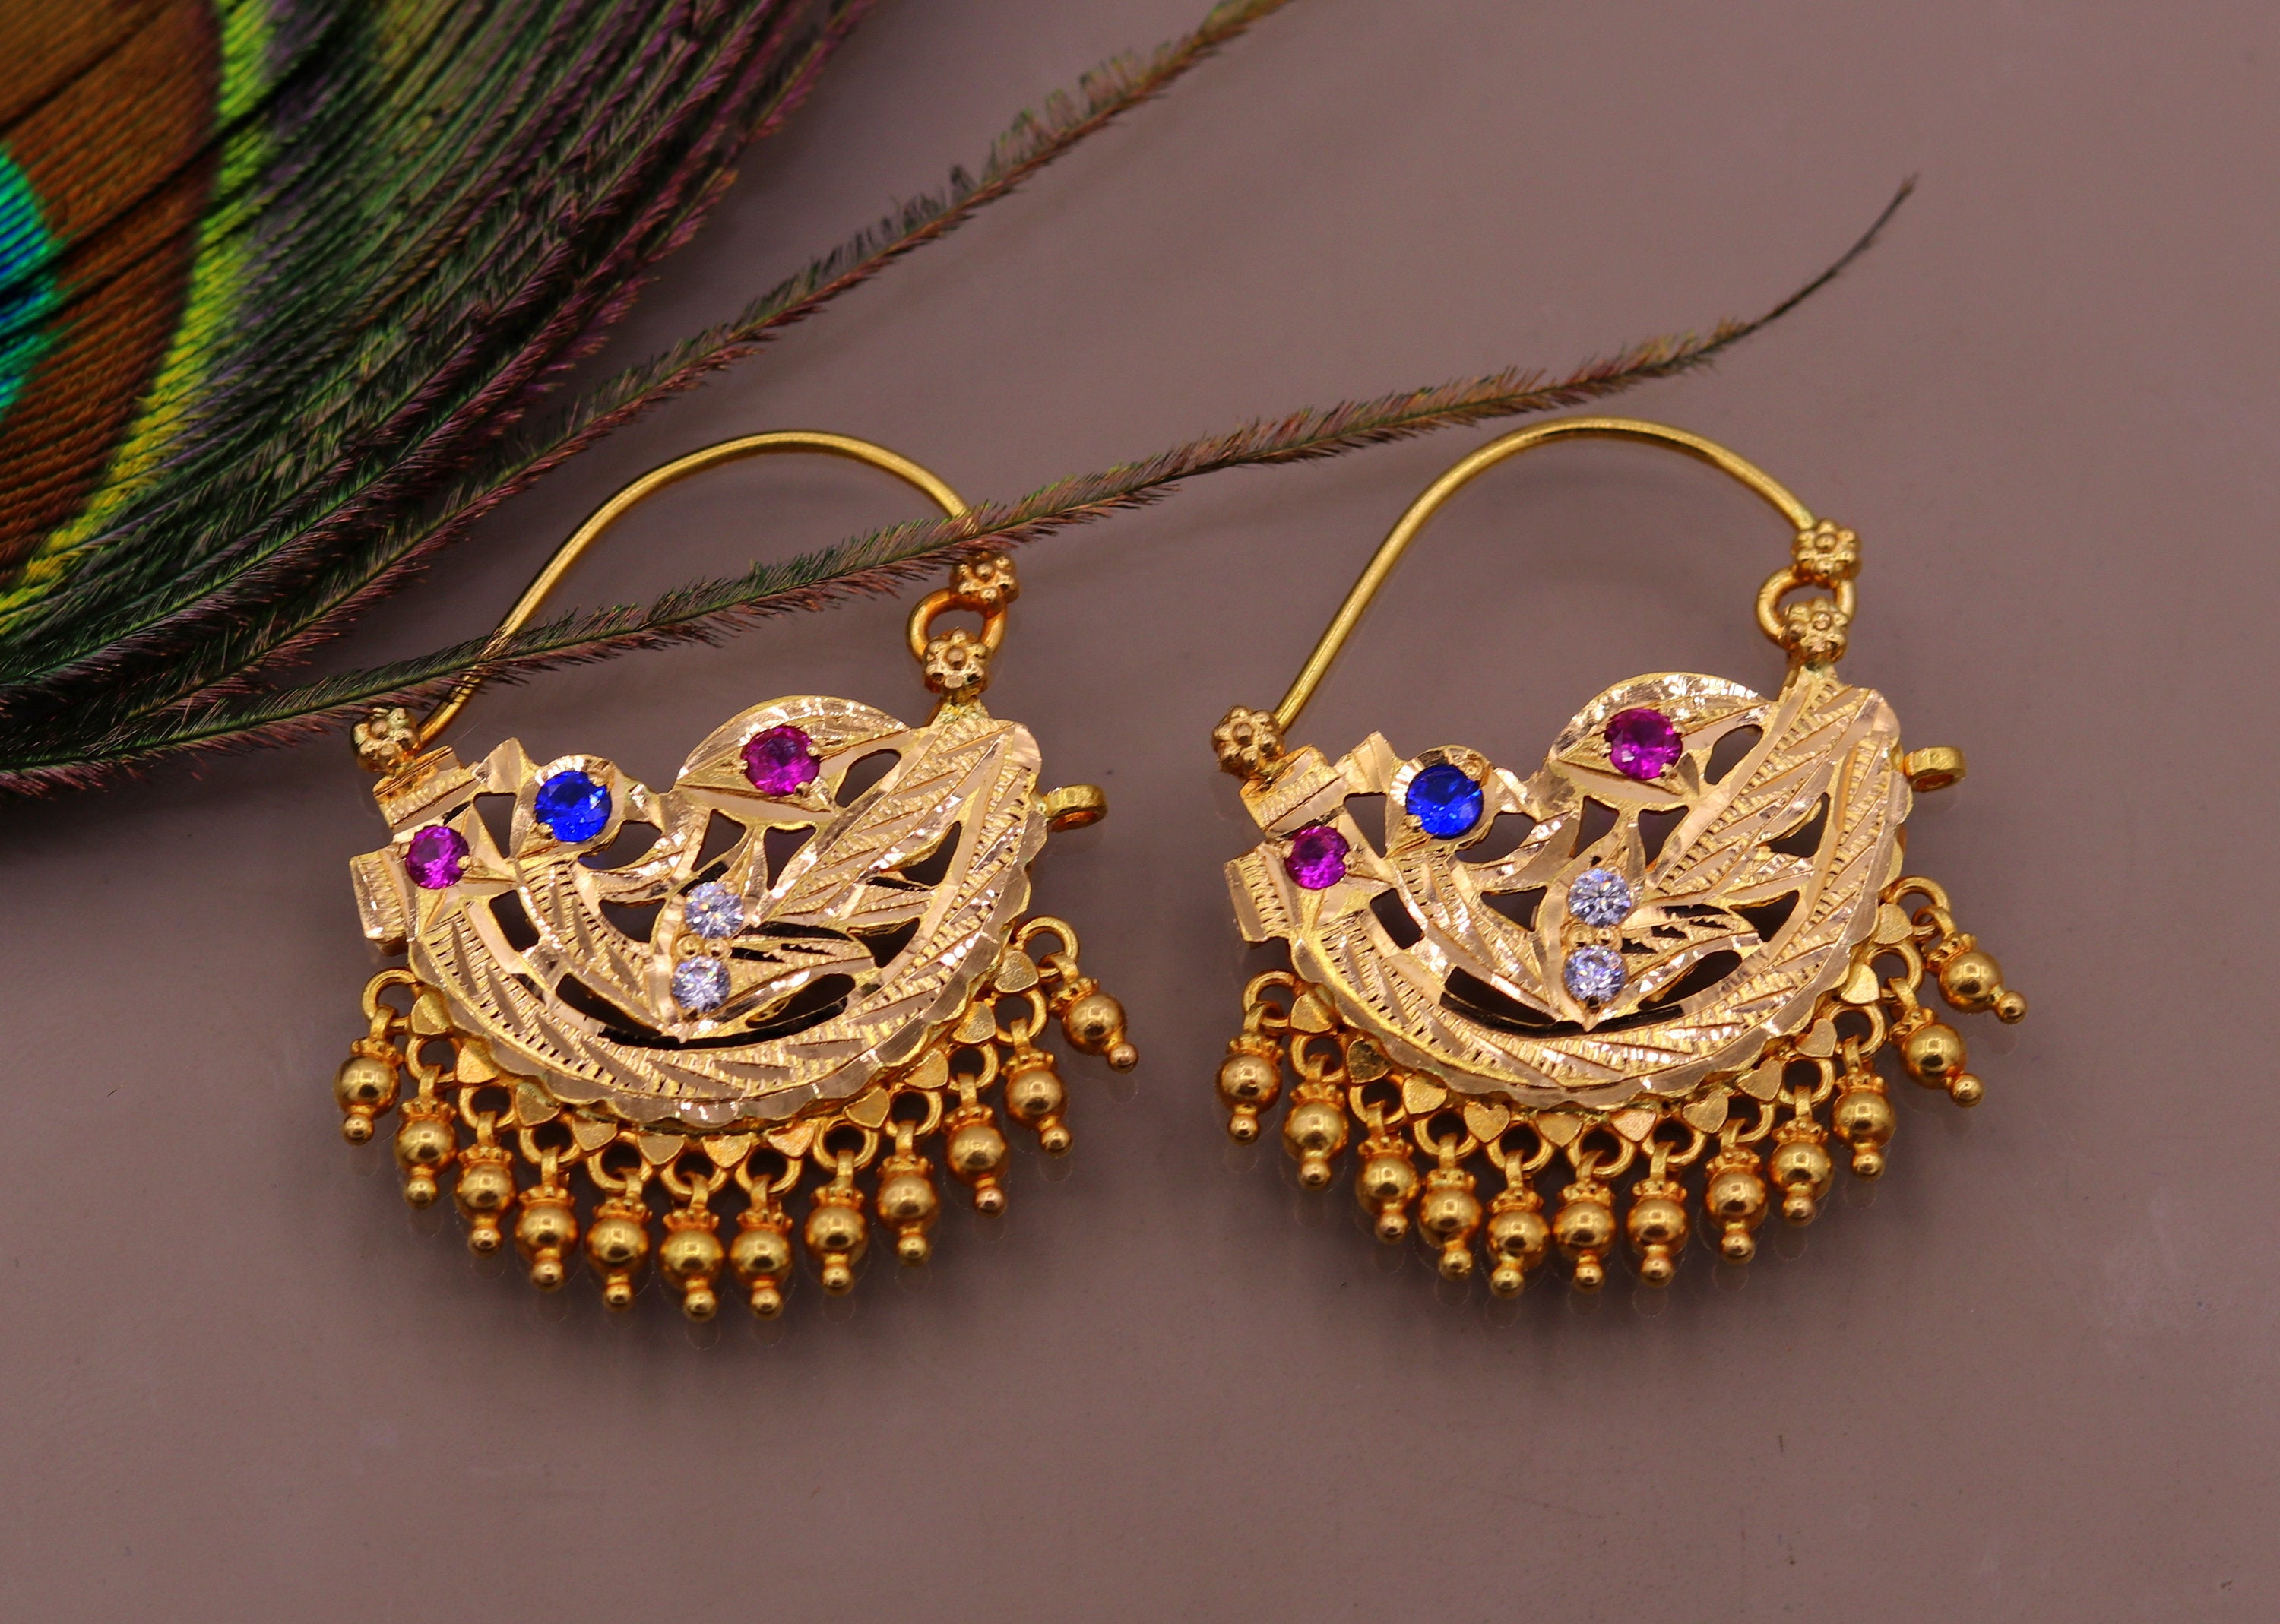 Ganesha Statement antique gold tone earrings at ₹1550 | Azilaa